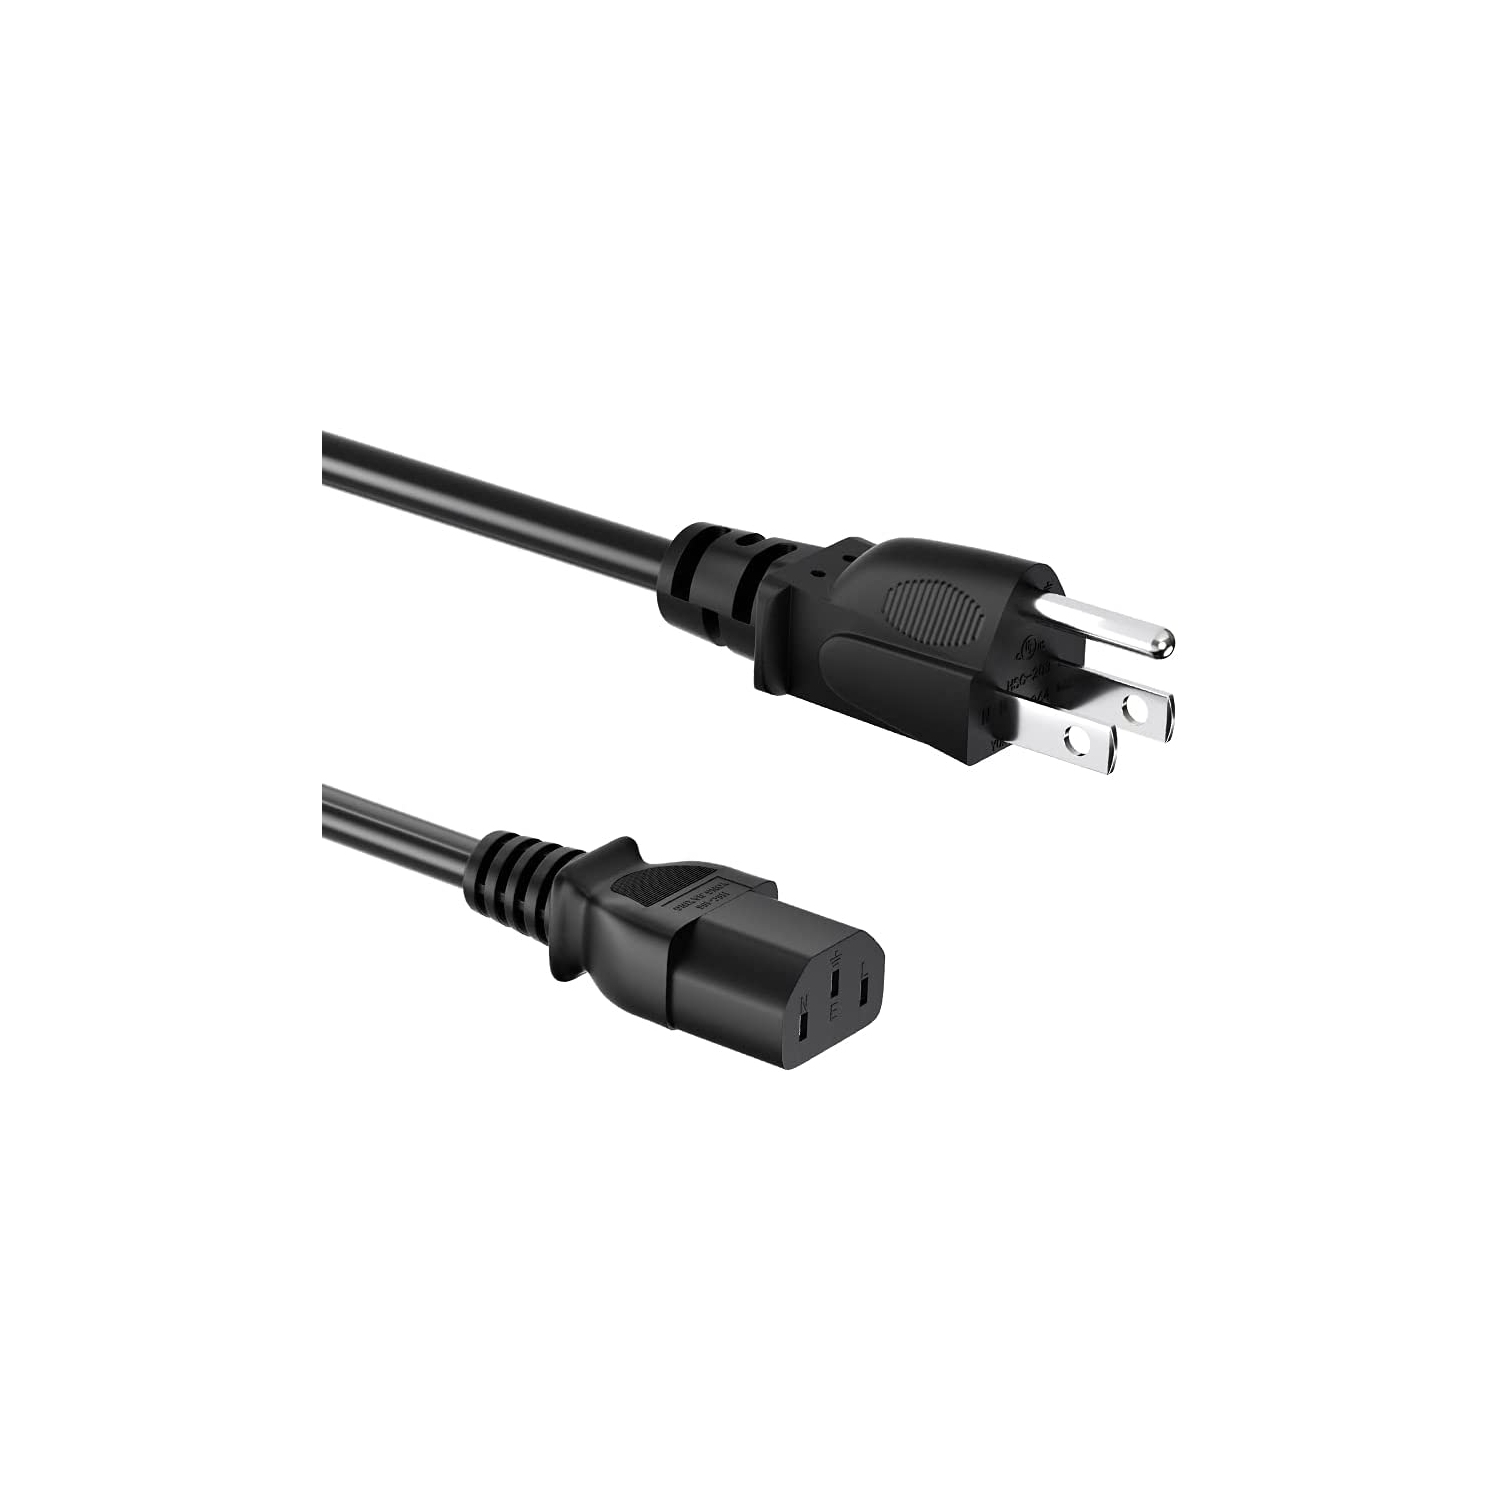 10 FT AC Power Cord, Computer Monitor TV Power Cable for LG, Printer, Samsung, LCD, PC, Epson Sony Dell